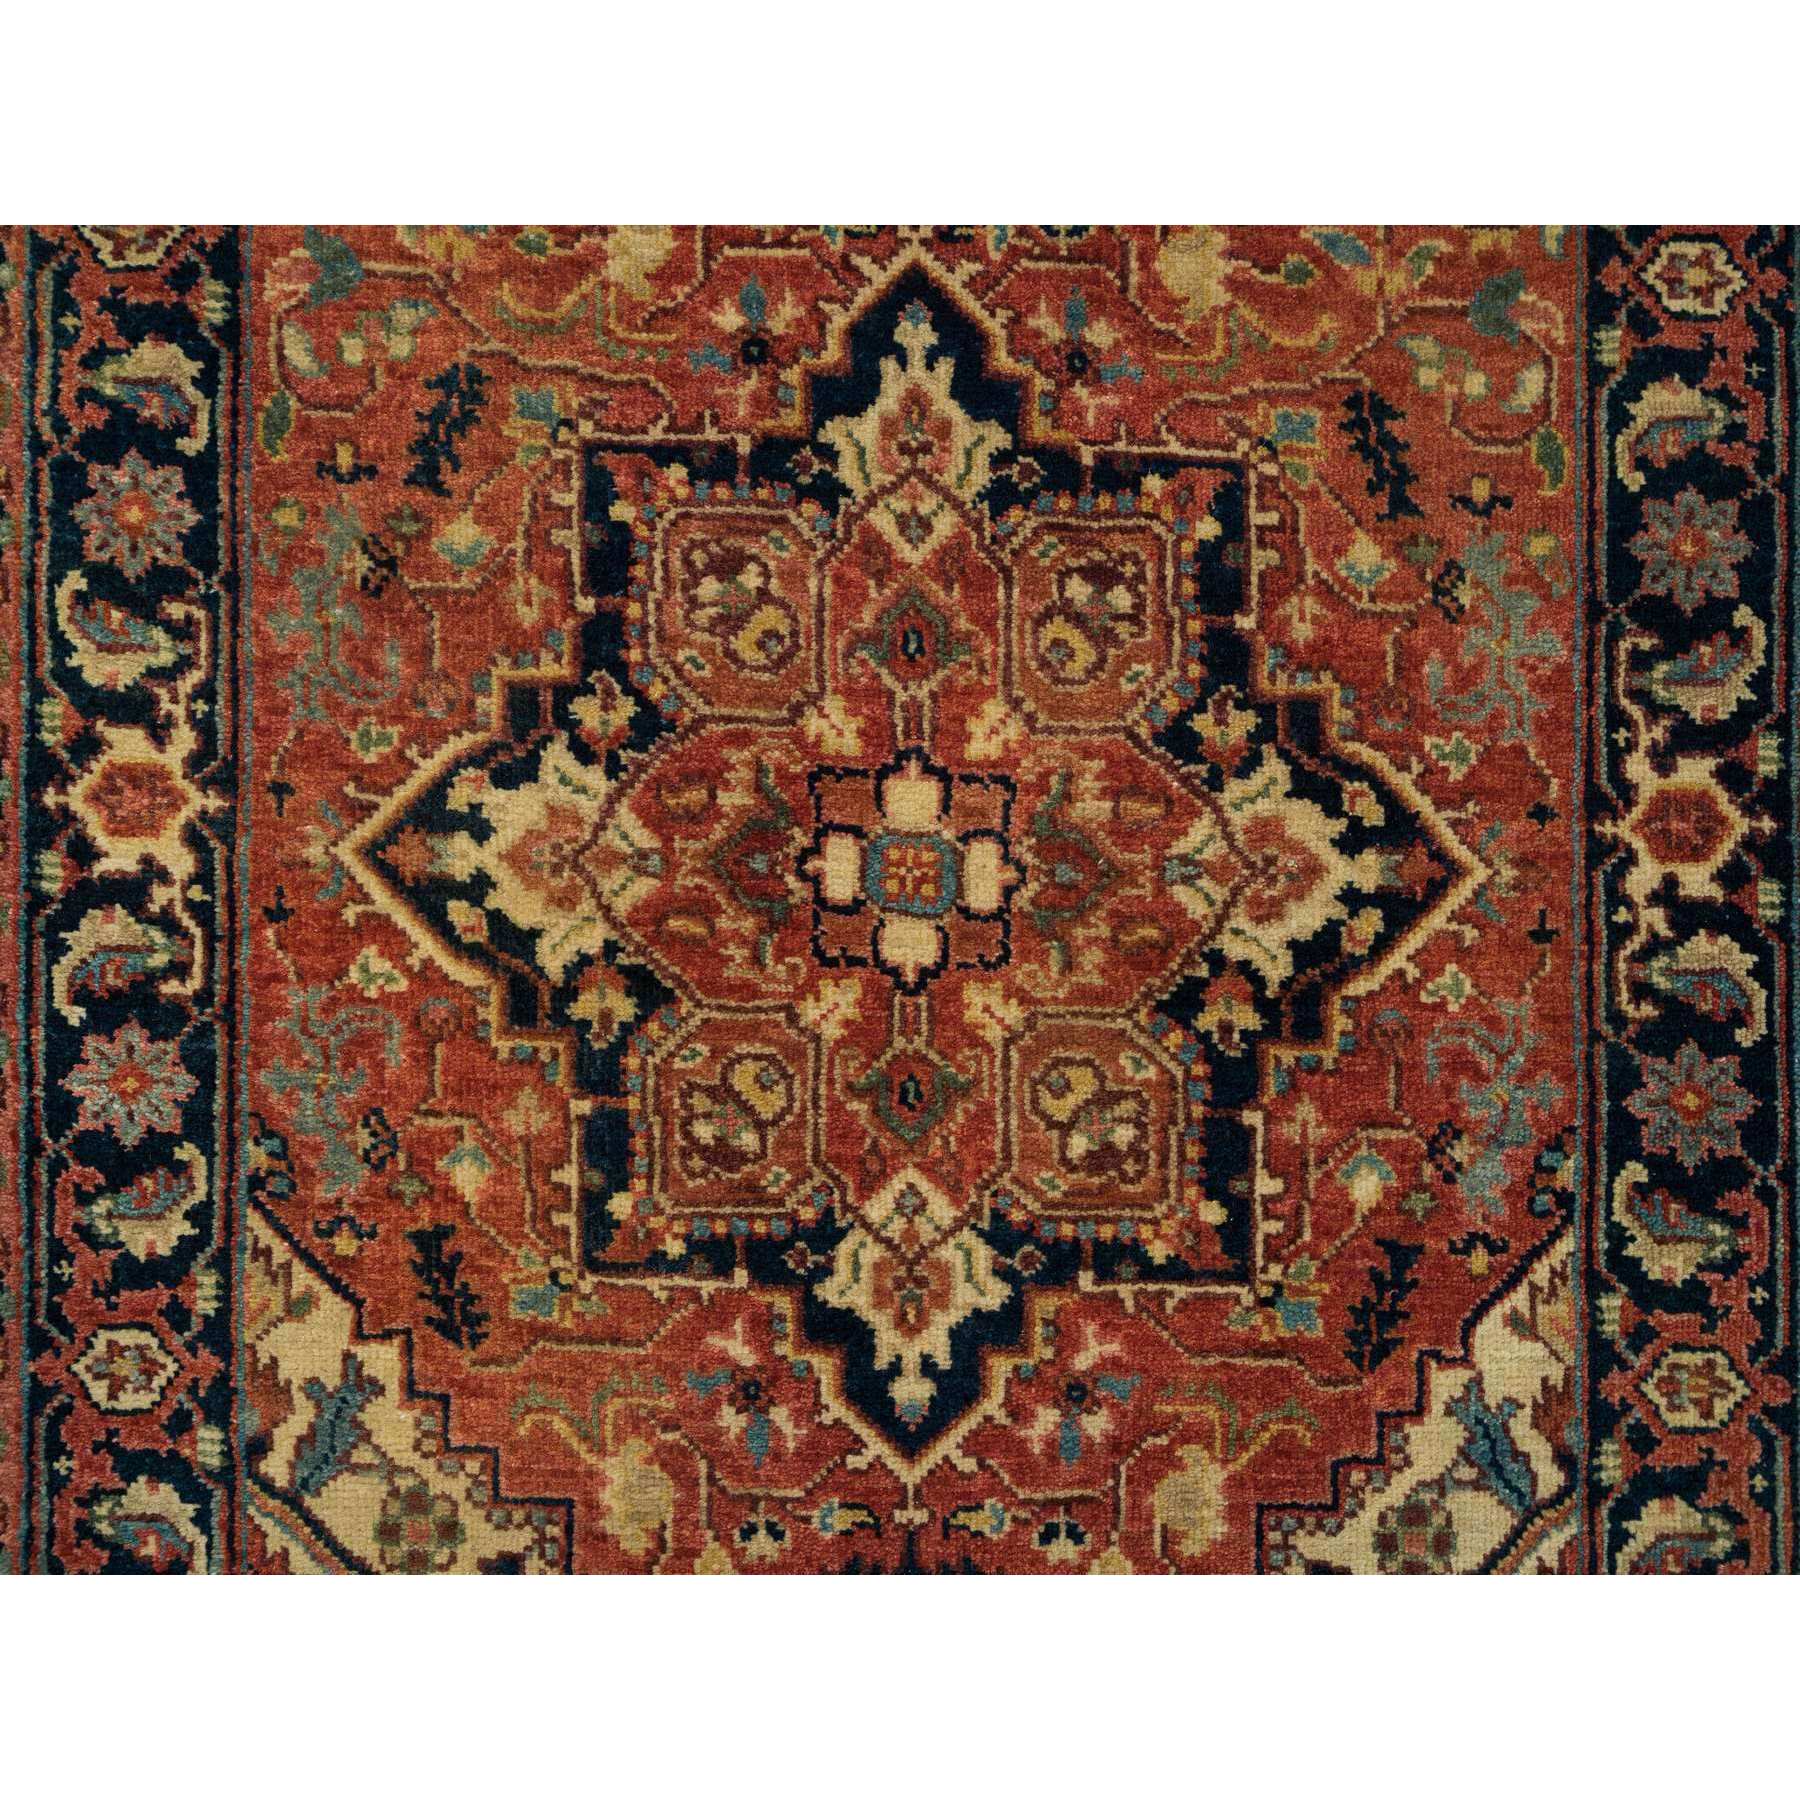 2'6"x22' Terracotta Red, Antiqued Fine Heriz Re-Creation, Natural Dyes, Dense Weave, Hand Woven, Pure Wool, XL Runner Oriental Rug 